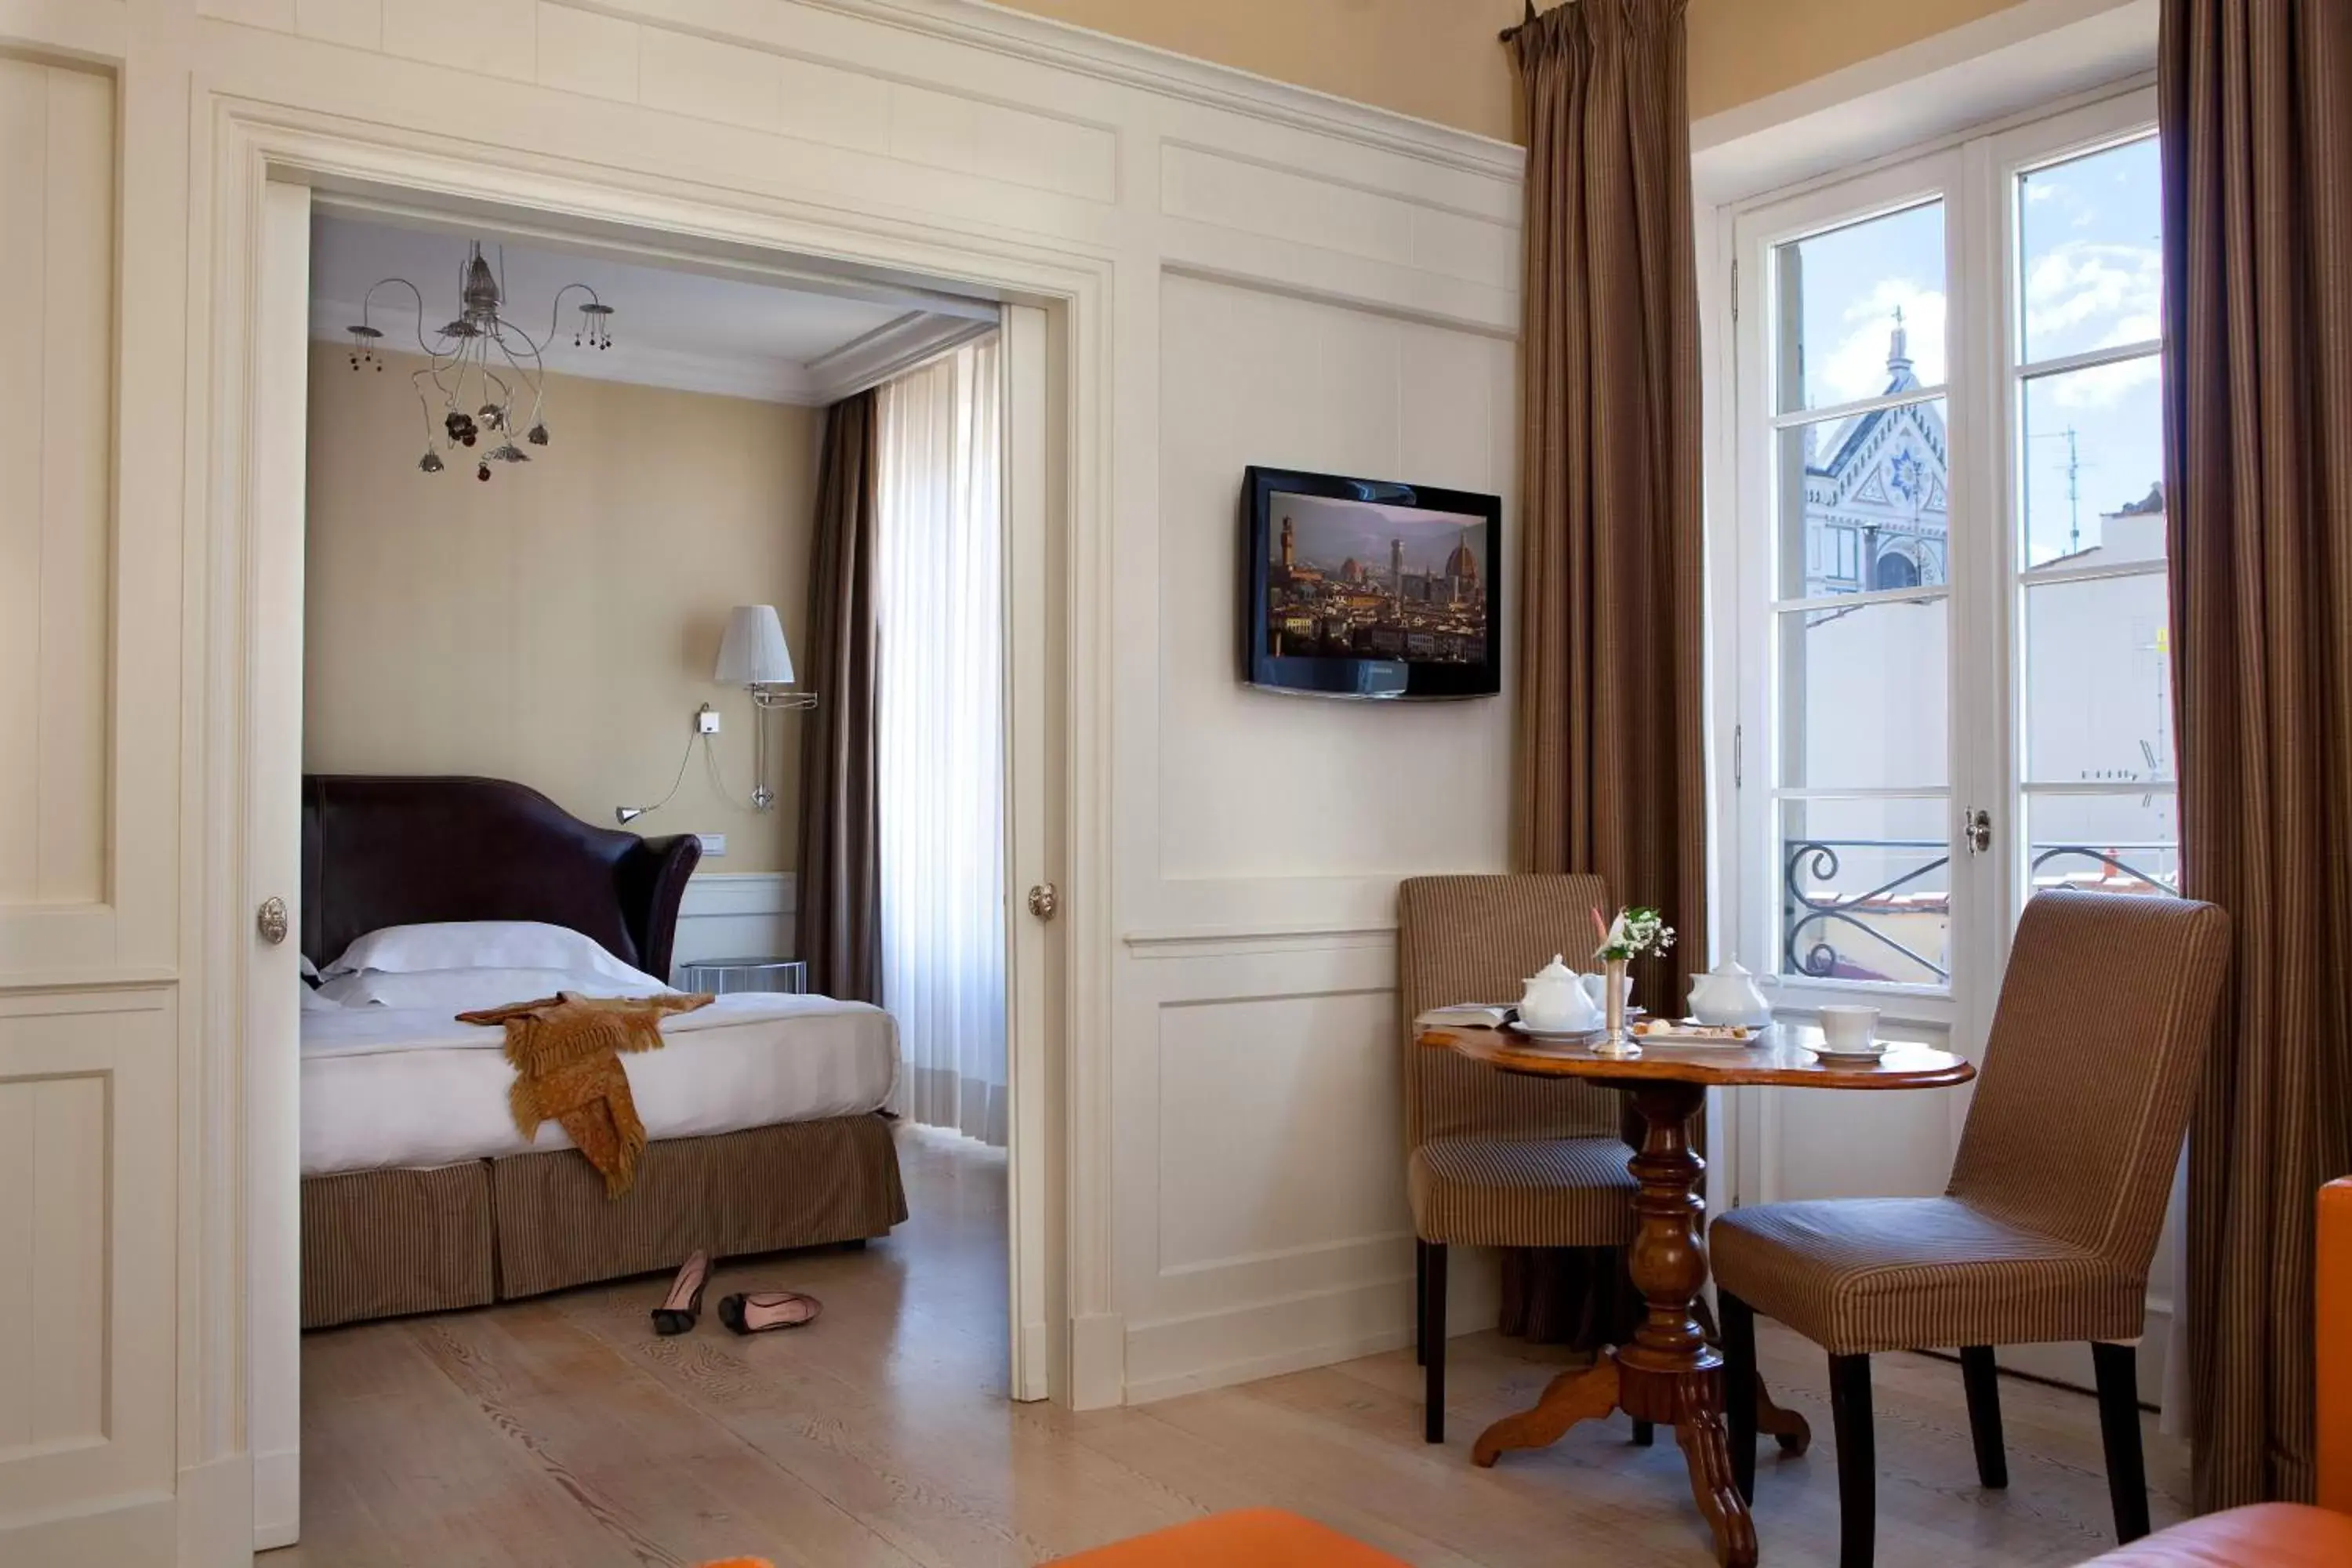 TV and multimedia in Relais Santa Croce, By Baglioni Hotels